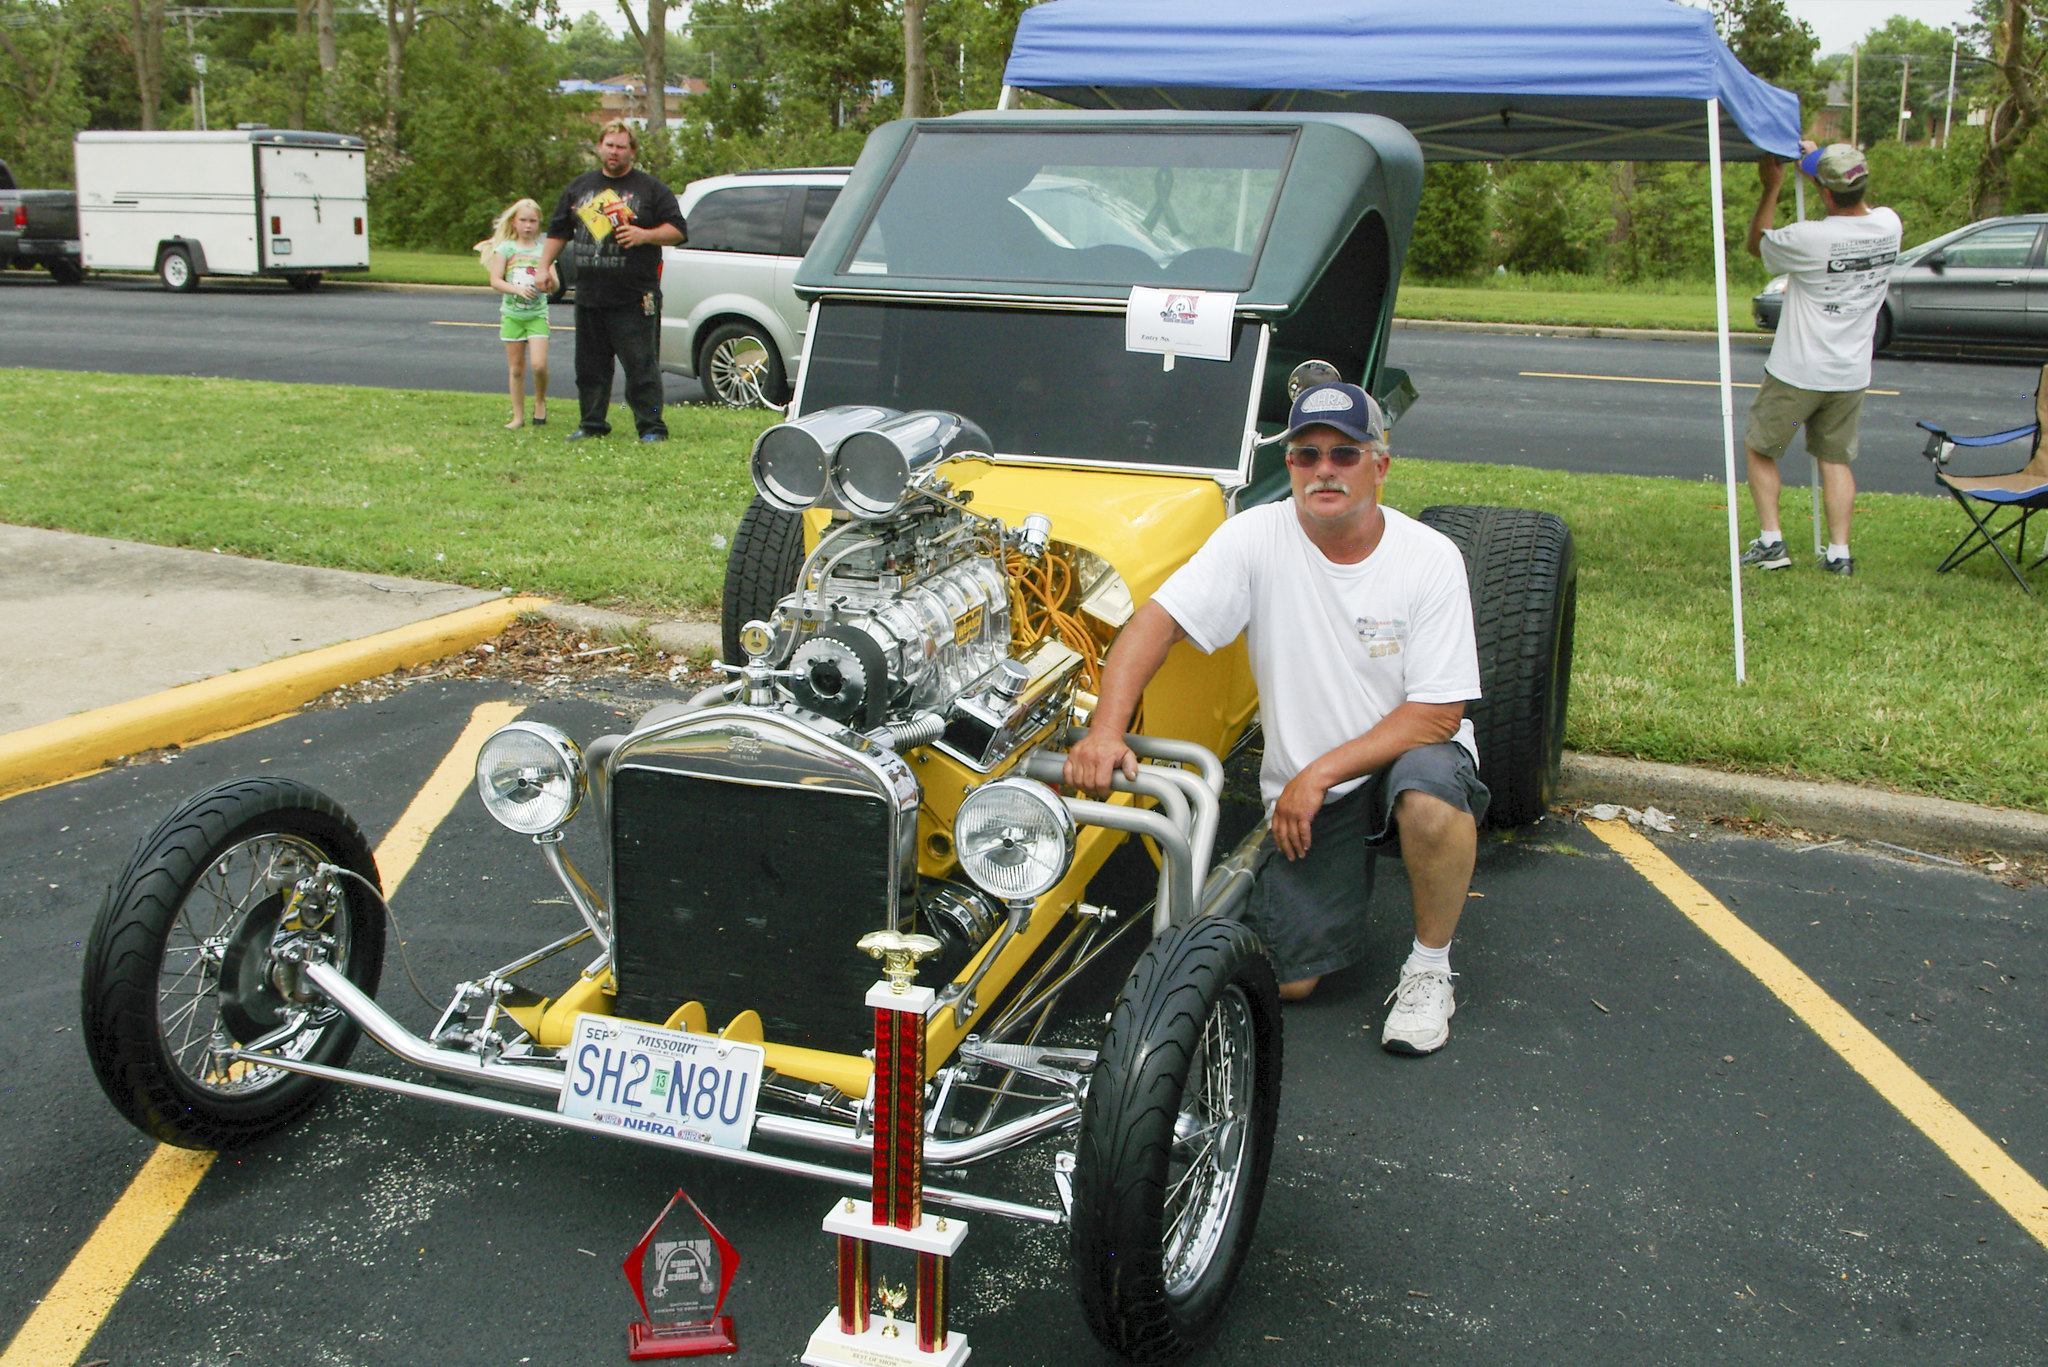 2013 Spirit of the Midwest "Rides for Guides" Classic Car Show and Motorcycle Show